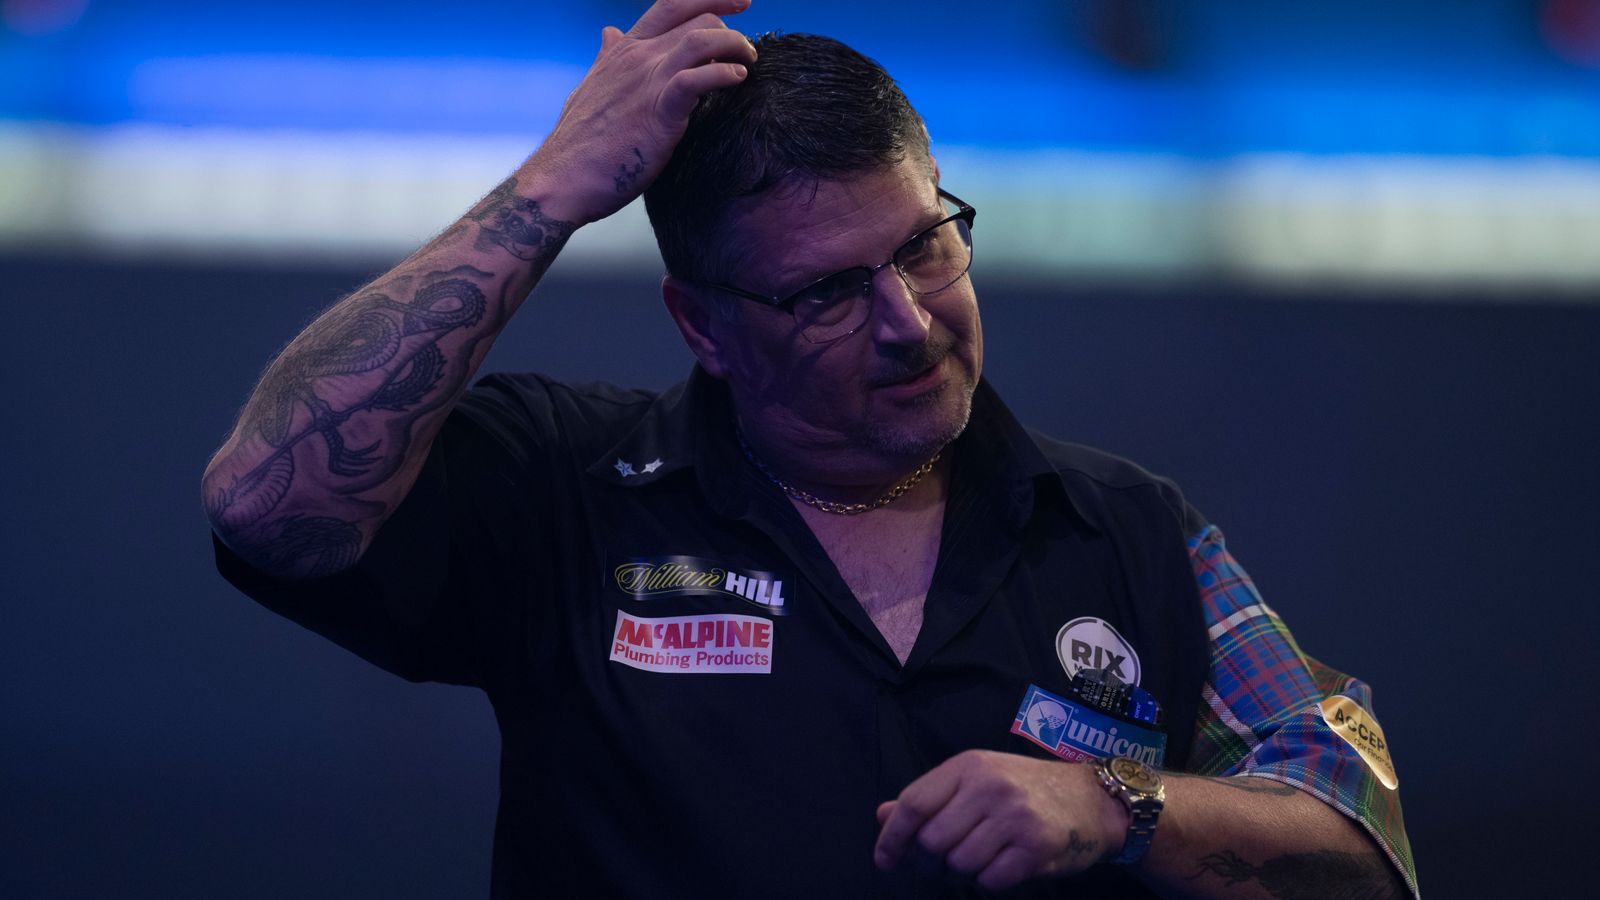 PDC Home Tour: Gary Anderson and Daryl Gurney ruled out due to weak Wi-Fi connection